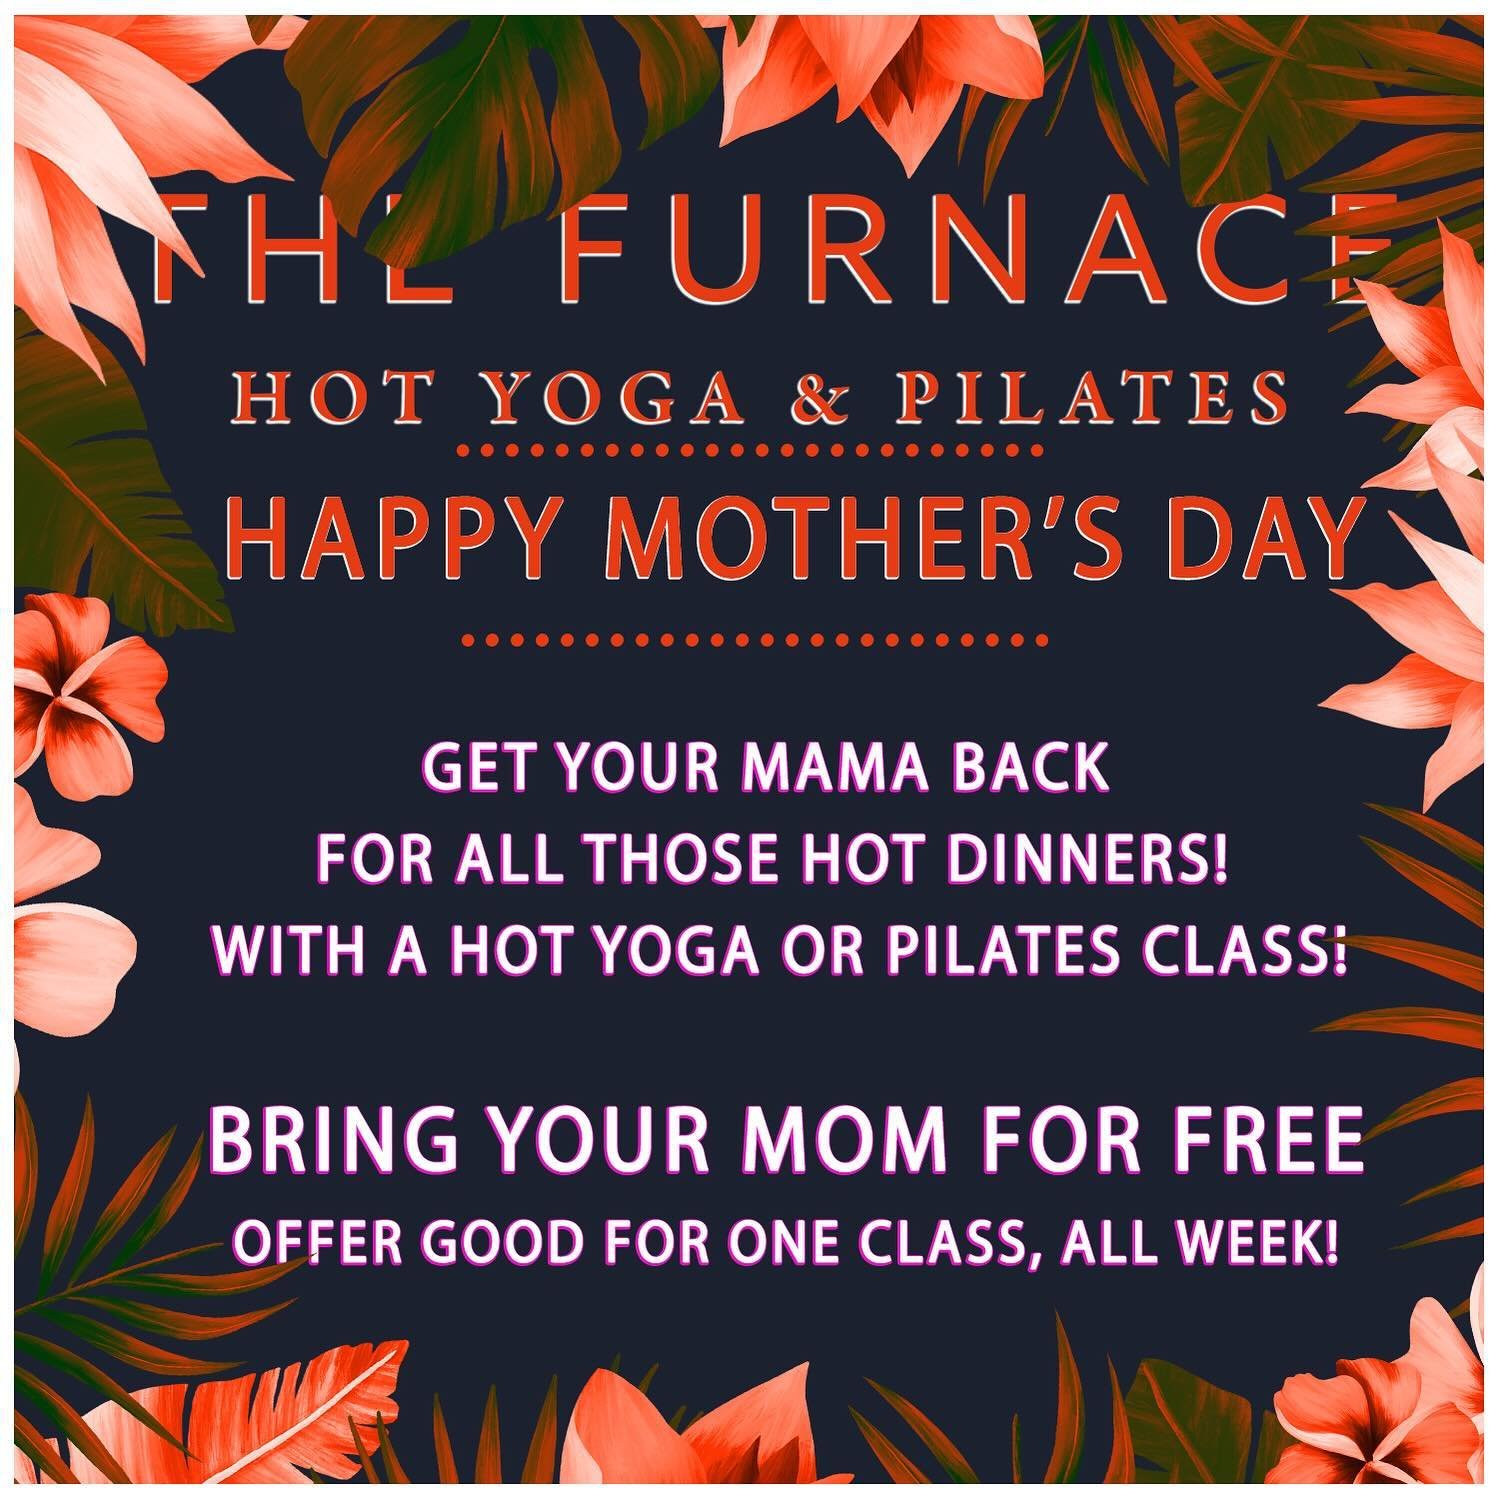 Happy Mother&rsquo;s Day! 
This offer is good for the whole week! Sunday to Saturday.
Open to First Timer&rsquo;s &amp; to your moms who have already taken class with us.

Have her register and fully fill out a profile, then text us her name and whic